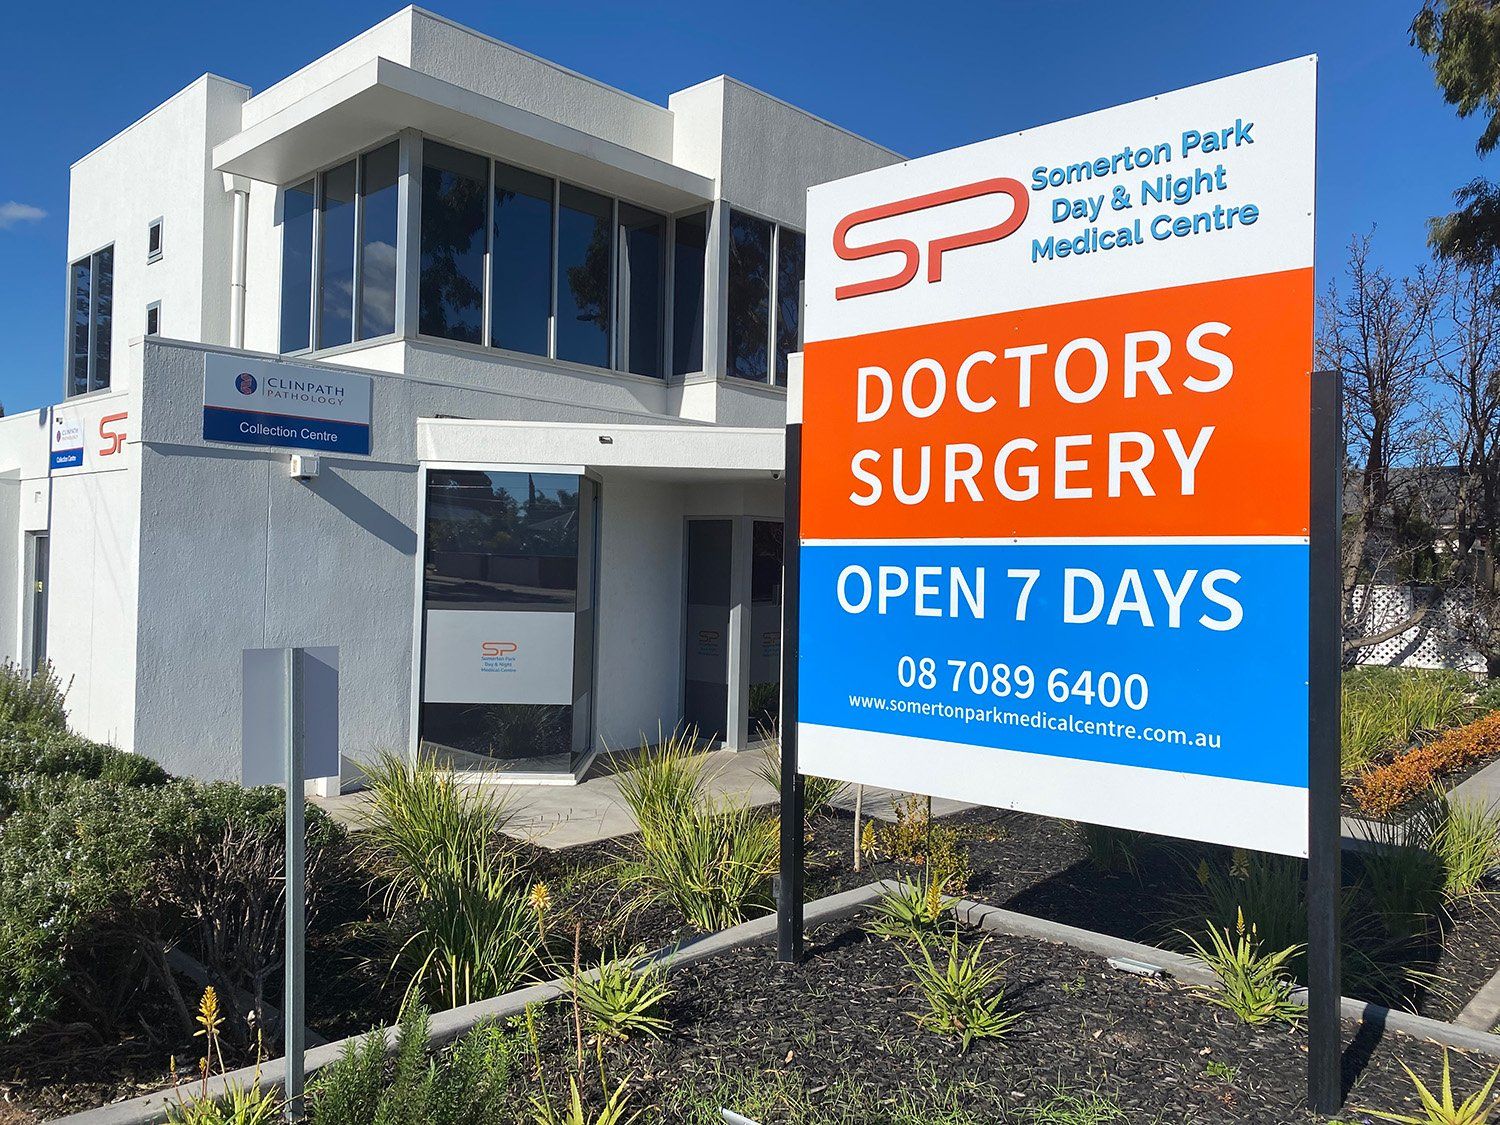 Building Front | Somerton Park Day Night Medical Centre